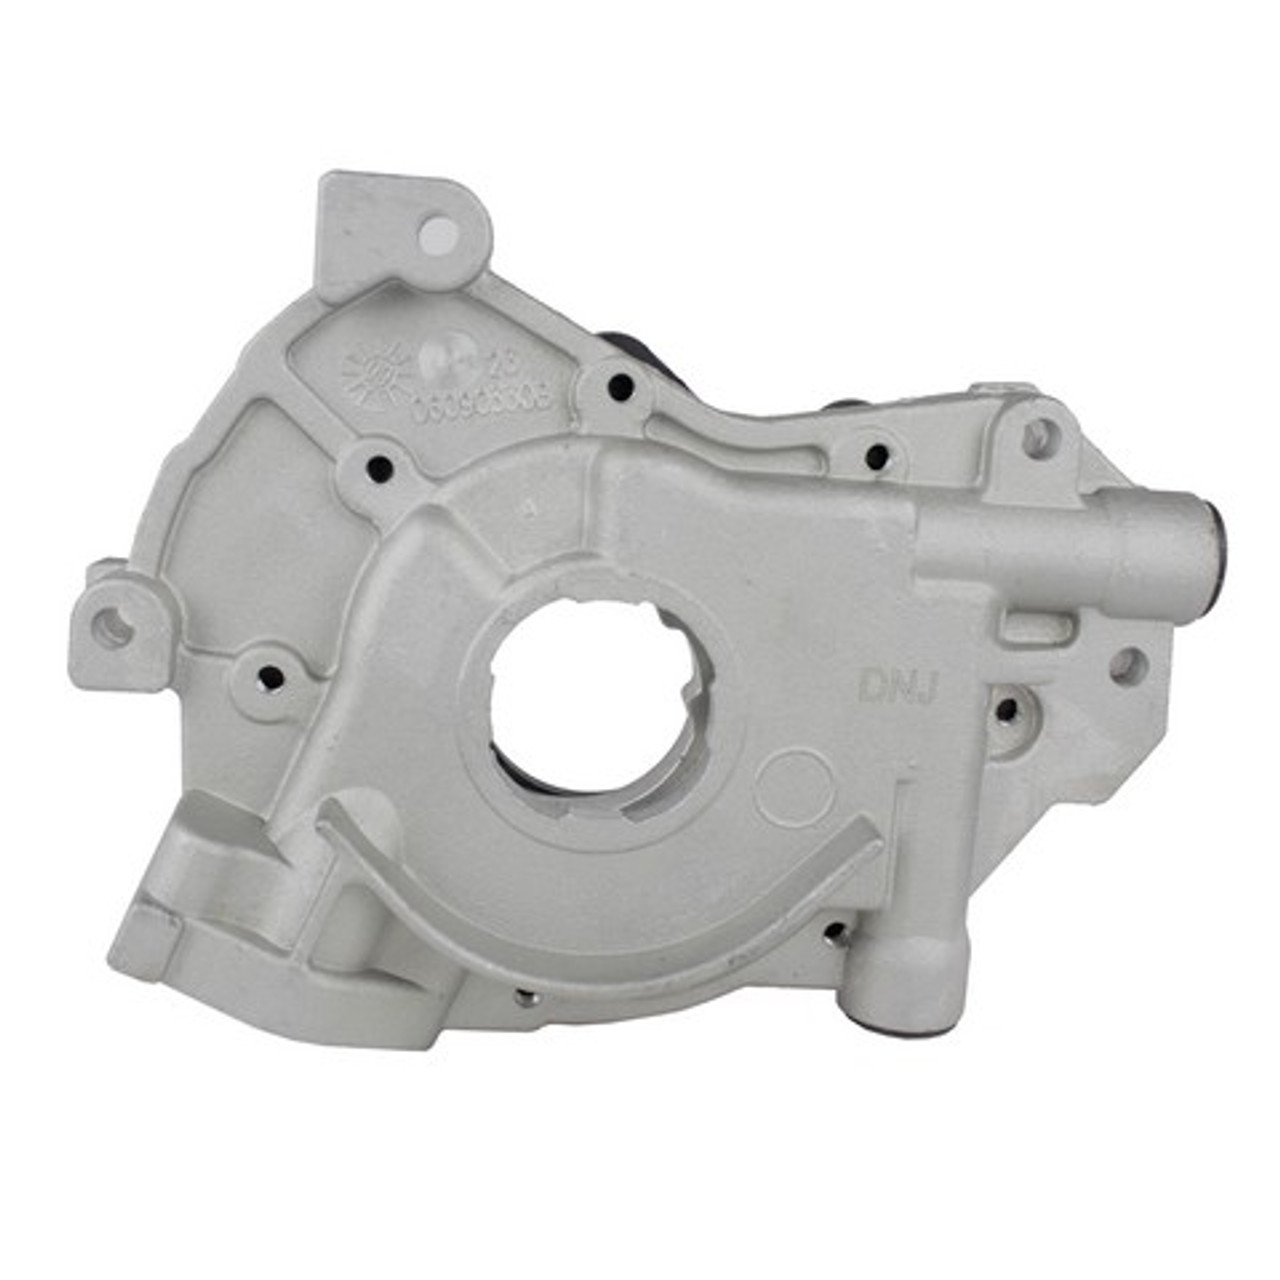 Oil Pump 5.4L 2005 Ford Expedition - OP4131.198